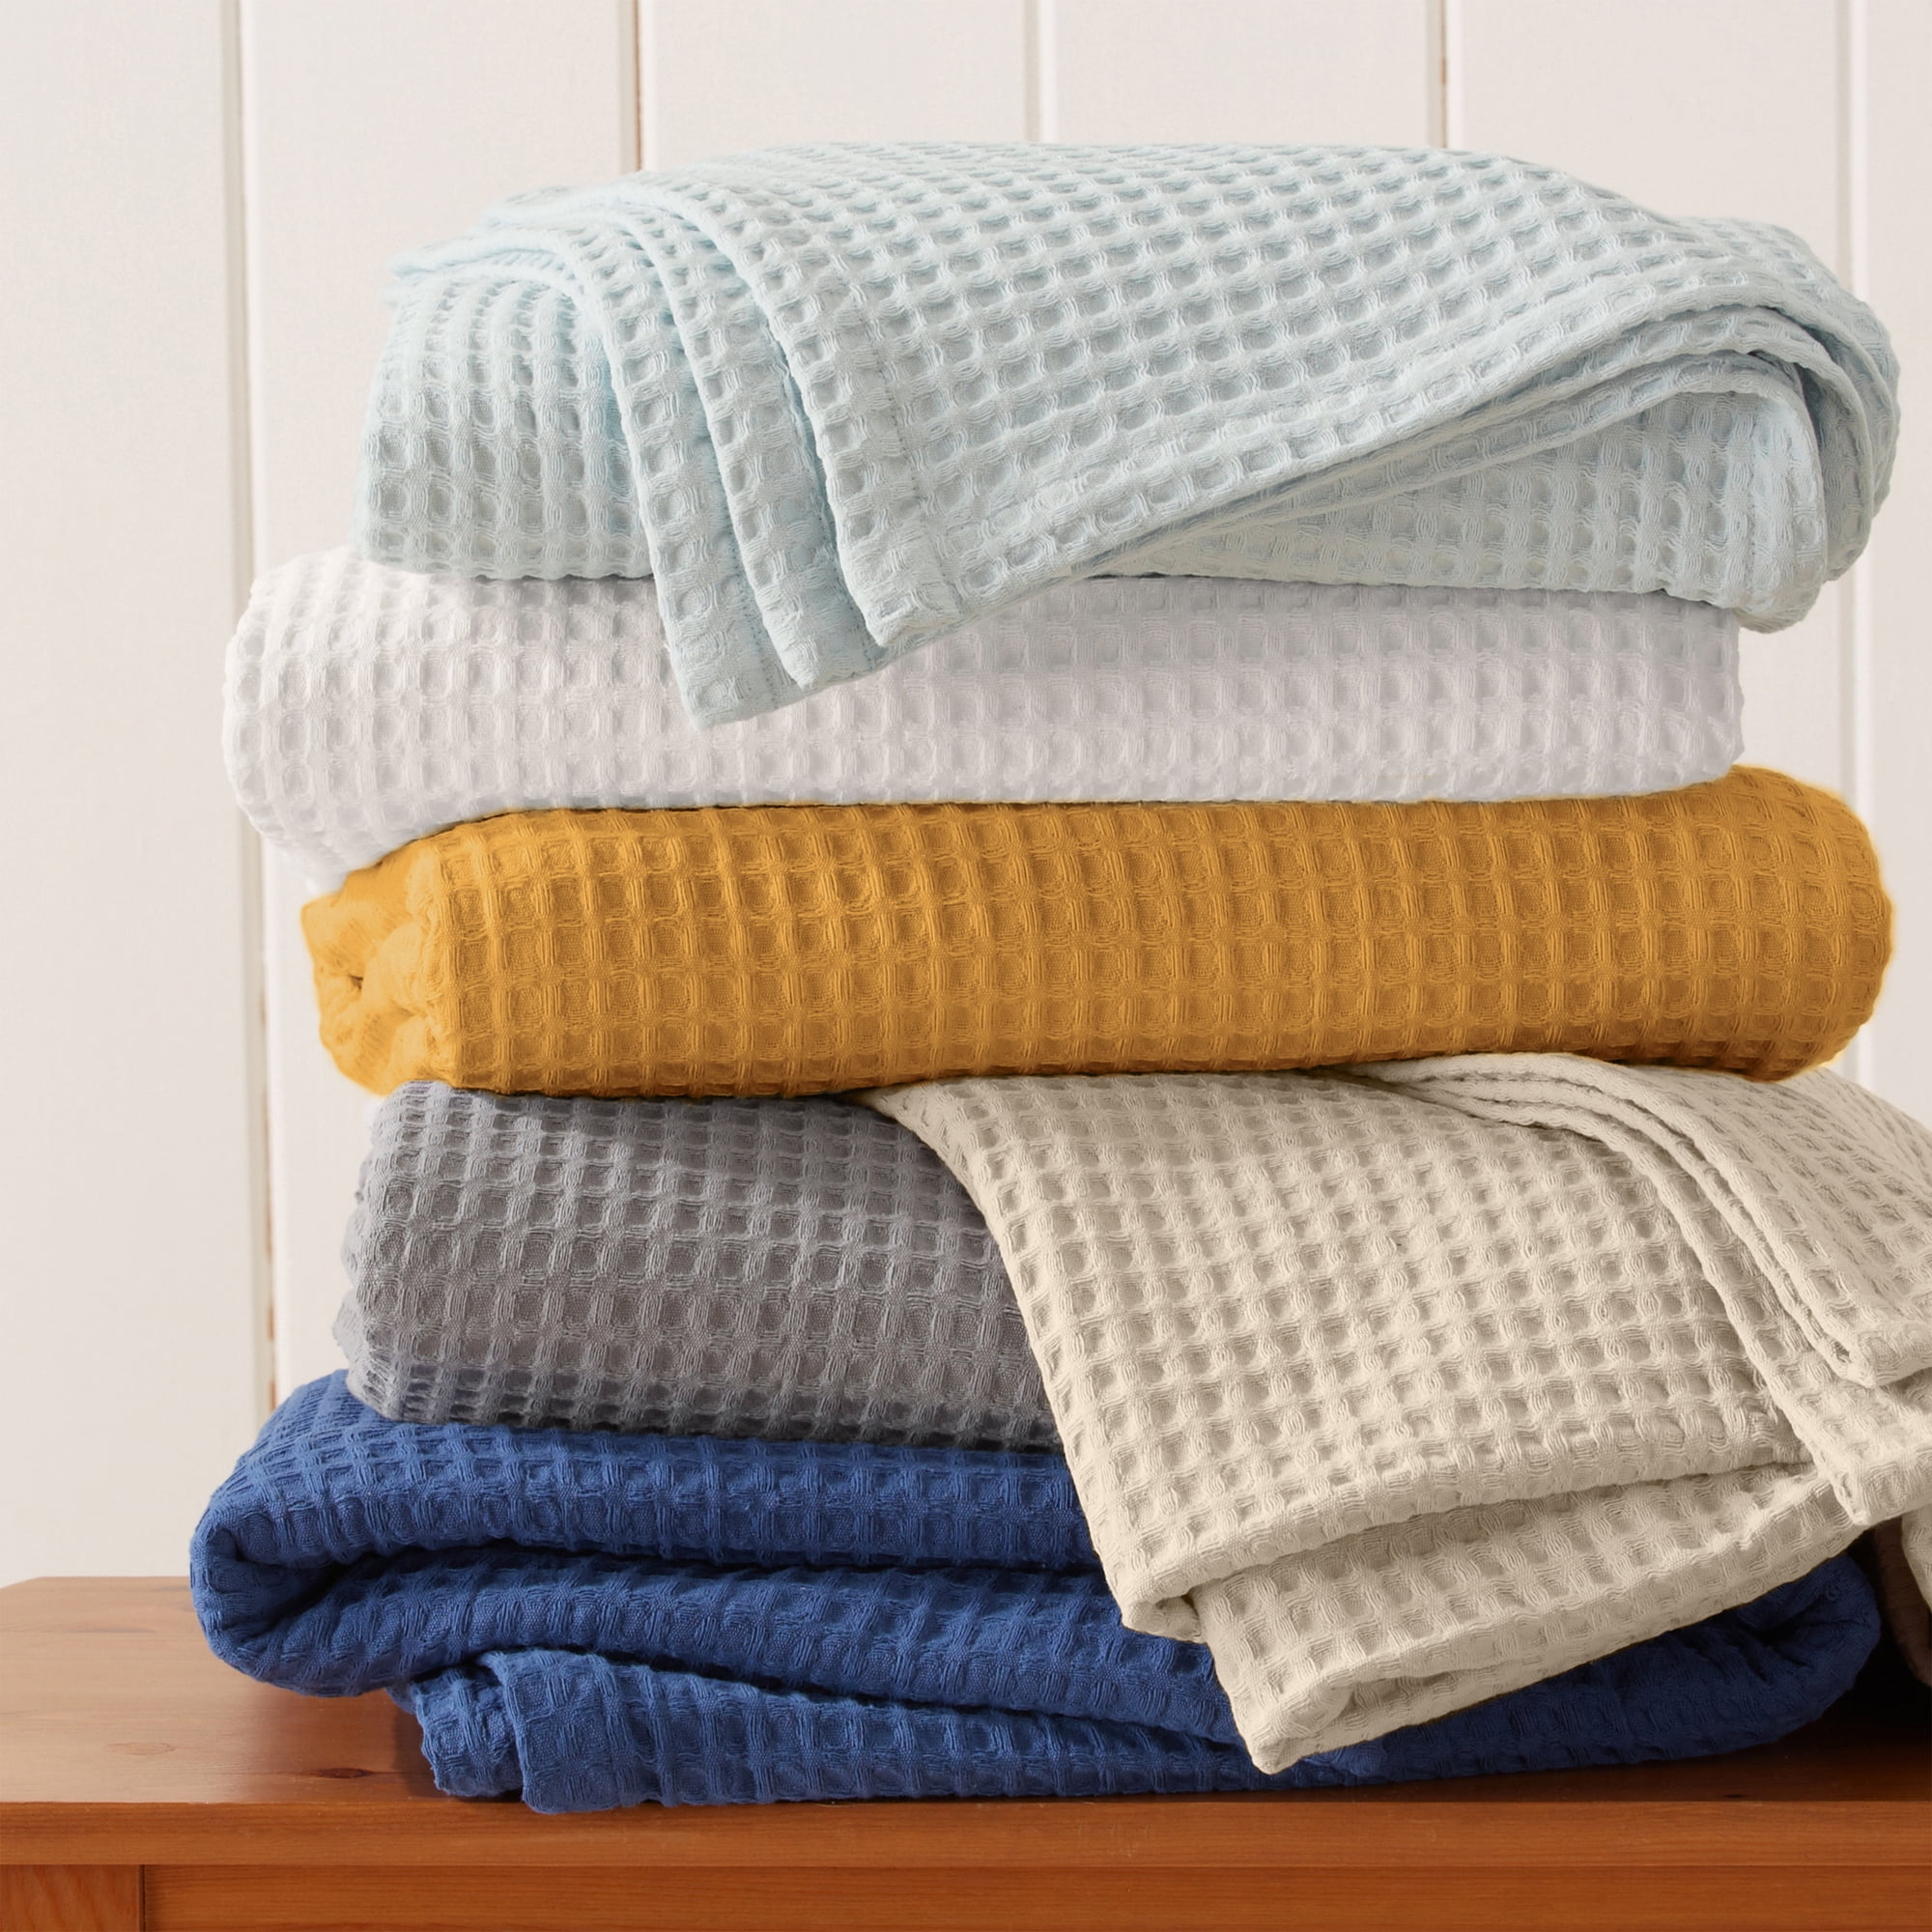 Details about   Better Homes & Gardens FULL QUEEN Gray Lightweight Breathable Cotton Blanket 